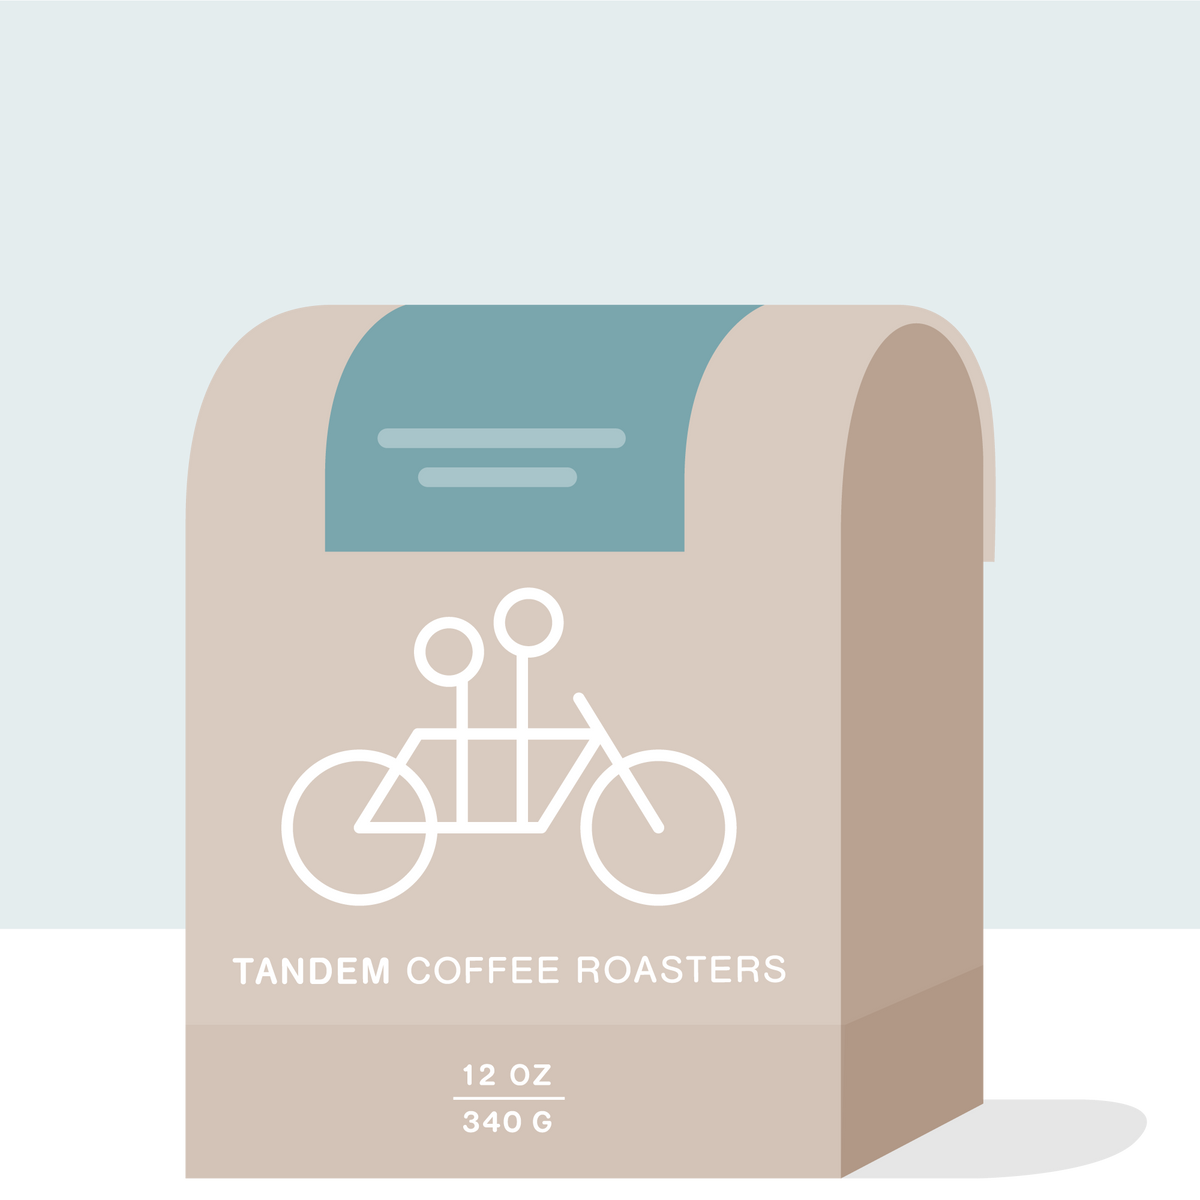 A beige coffee bag with a minimalist design labeled "Olvin Moreno - Honduras." The bag features an illustration of a tandem bicycle and text indicating the coffee weight as 12 oz or 340 g. Highlighting unique coffees from expert coffee farmers under the brand name Tandem Coffee Roasters, the solid teal background creates a simple yet stylish look.